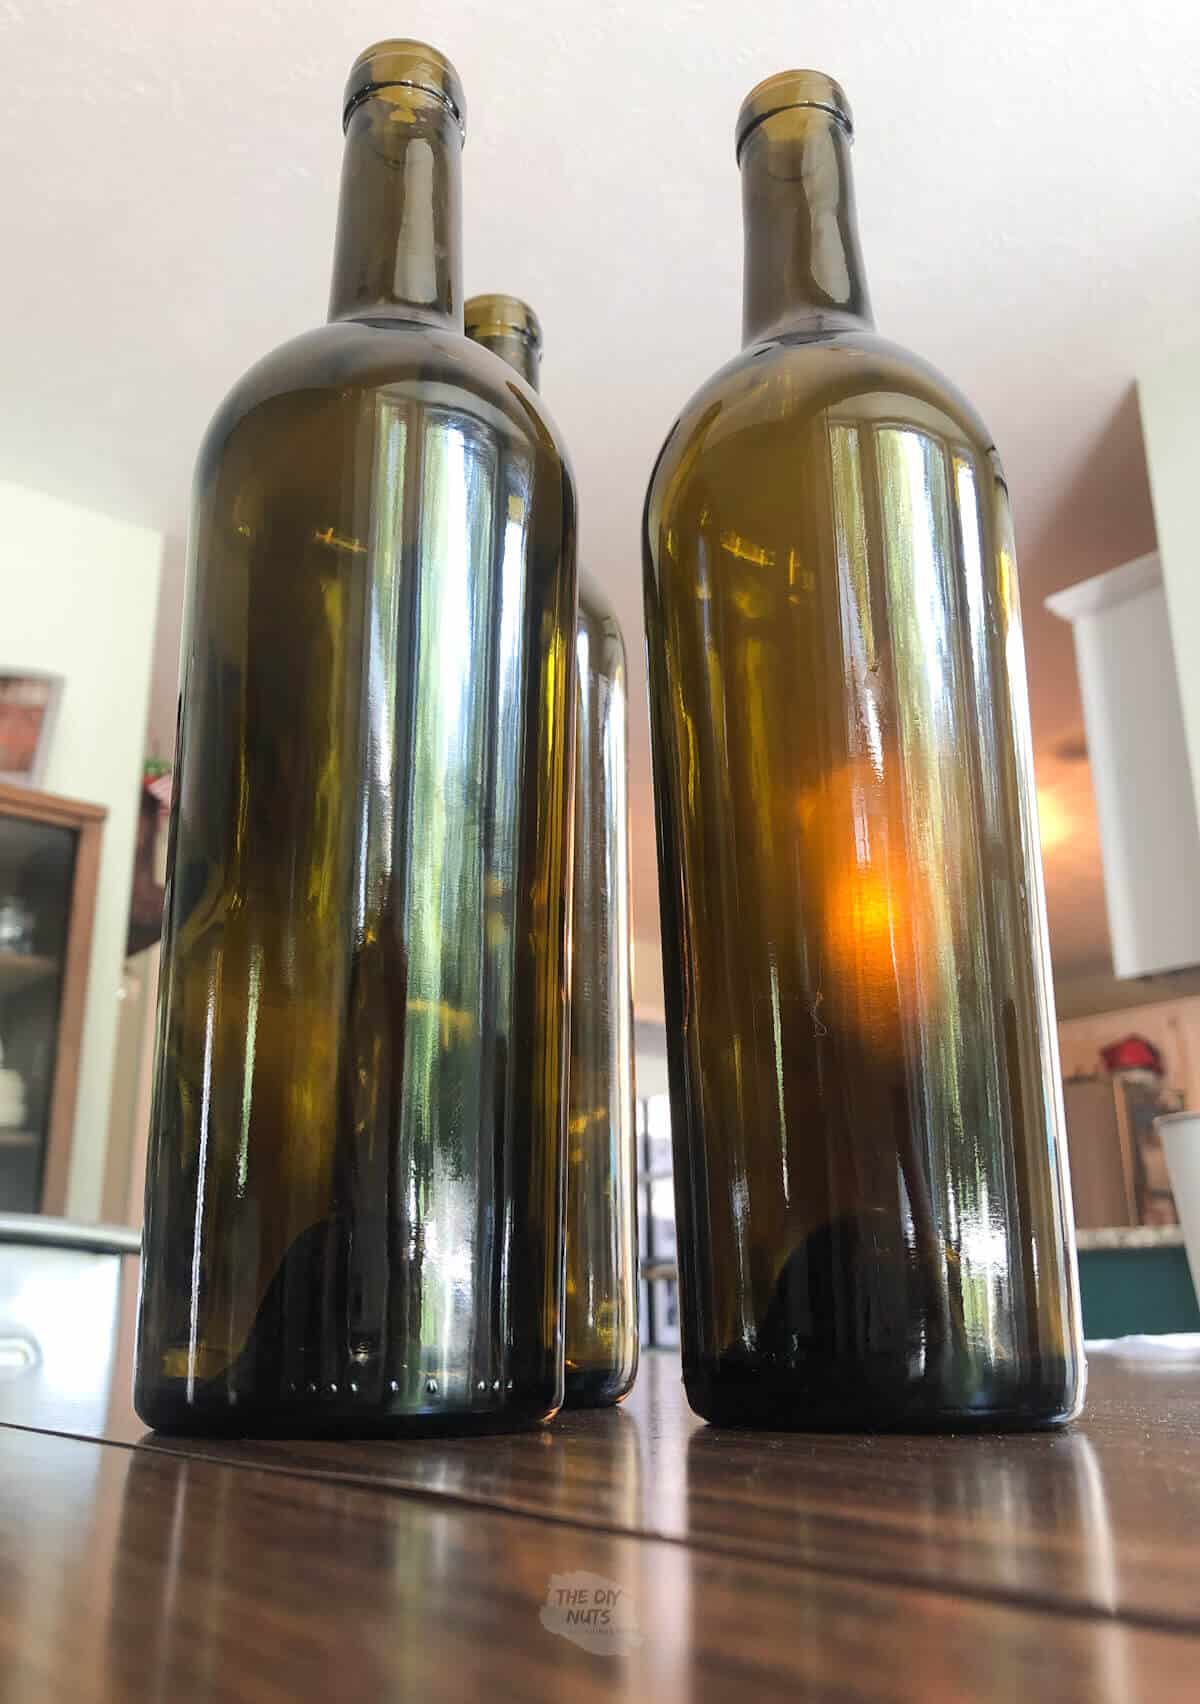 3 wine bottles without labels on table.